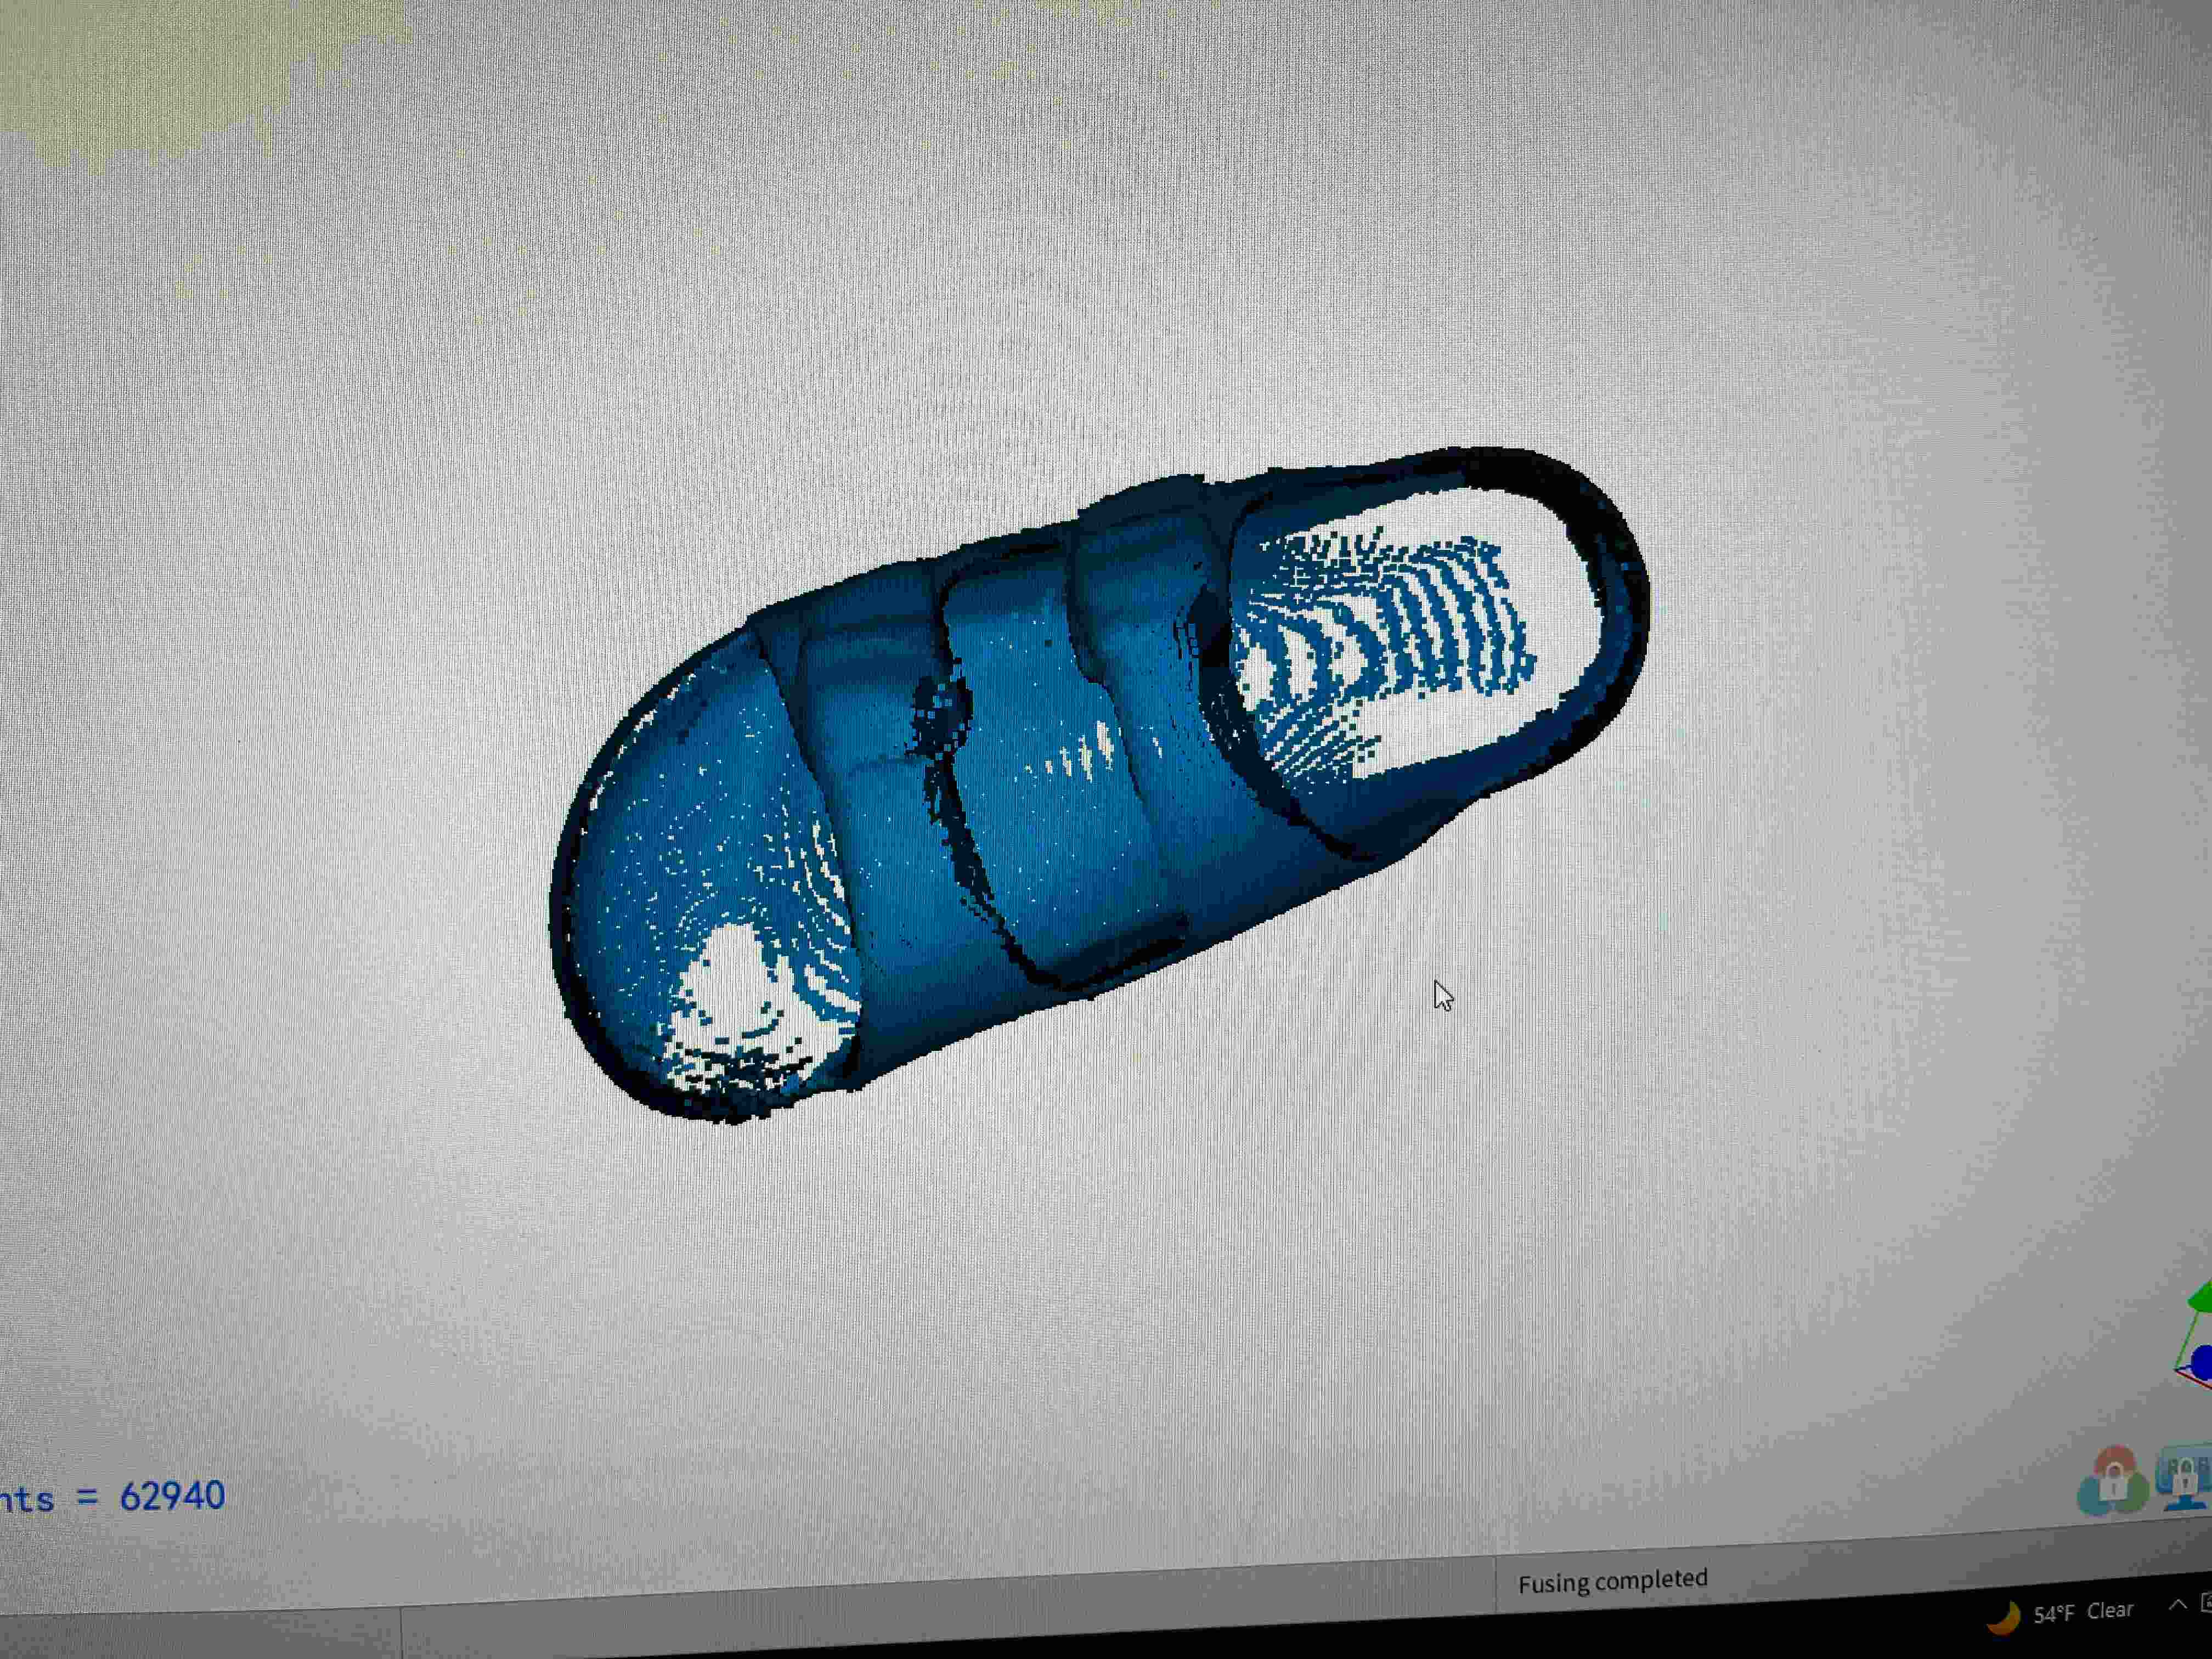 Fused point cloud of the shoe